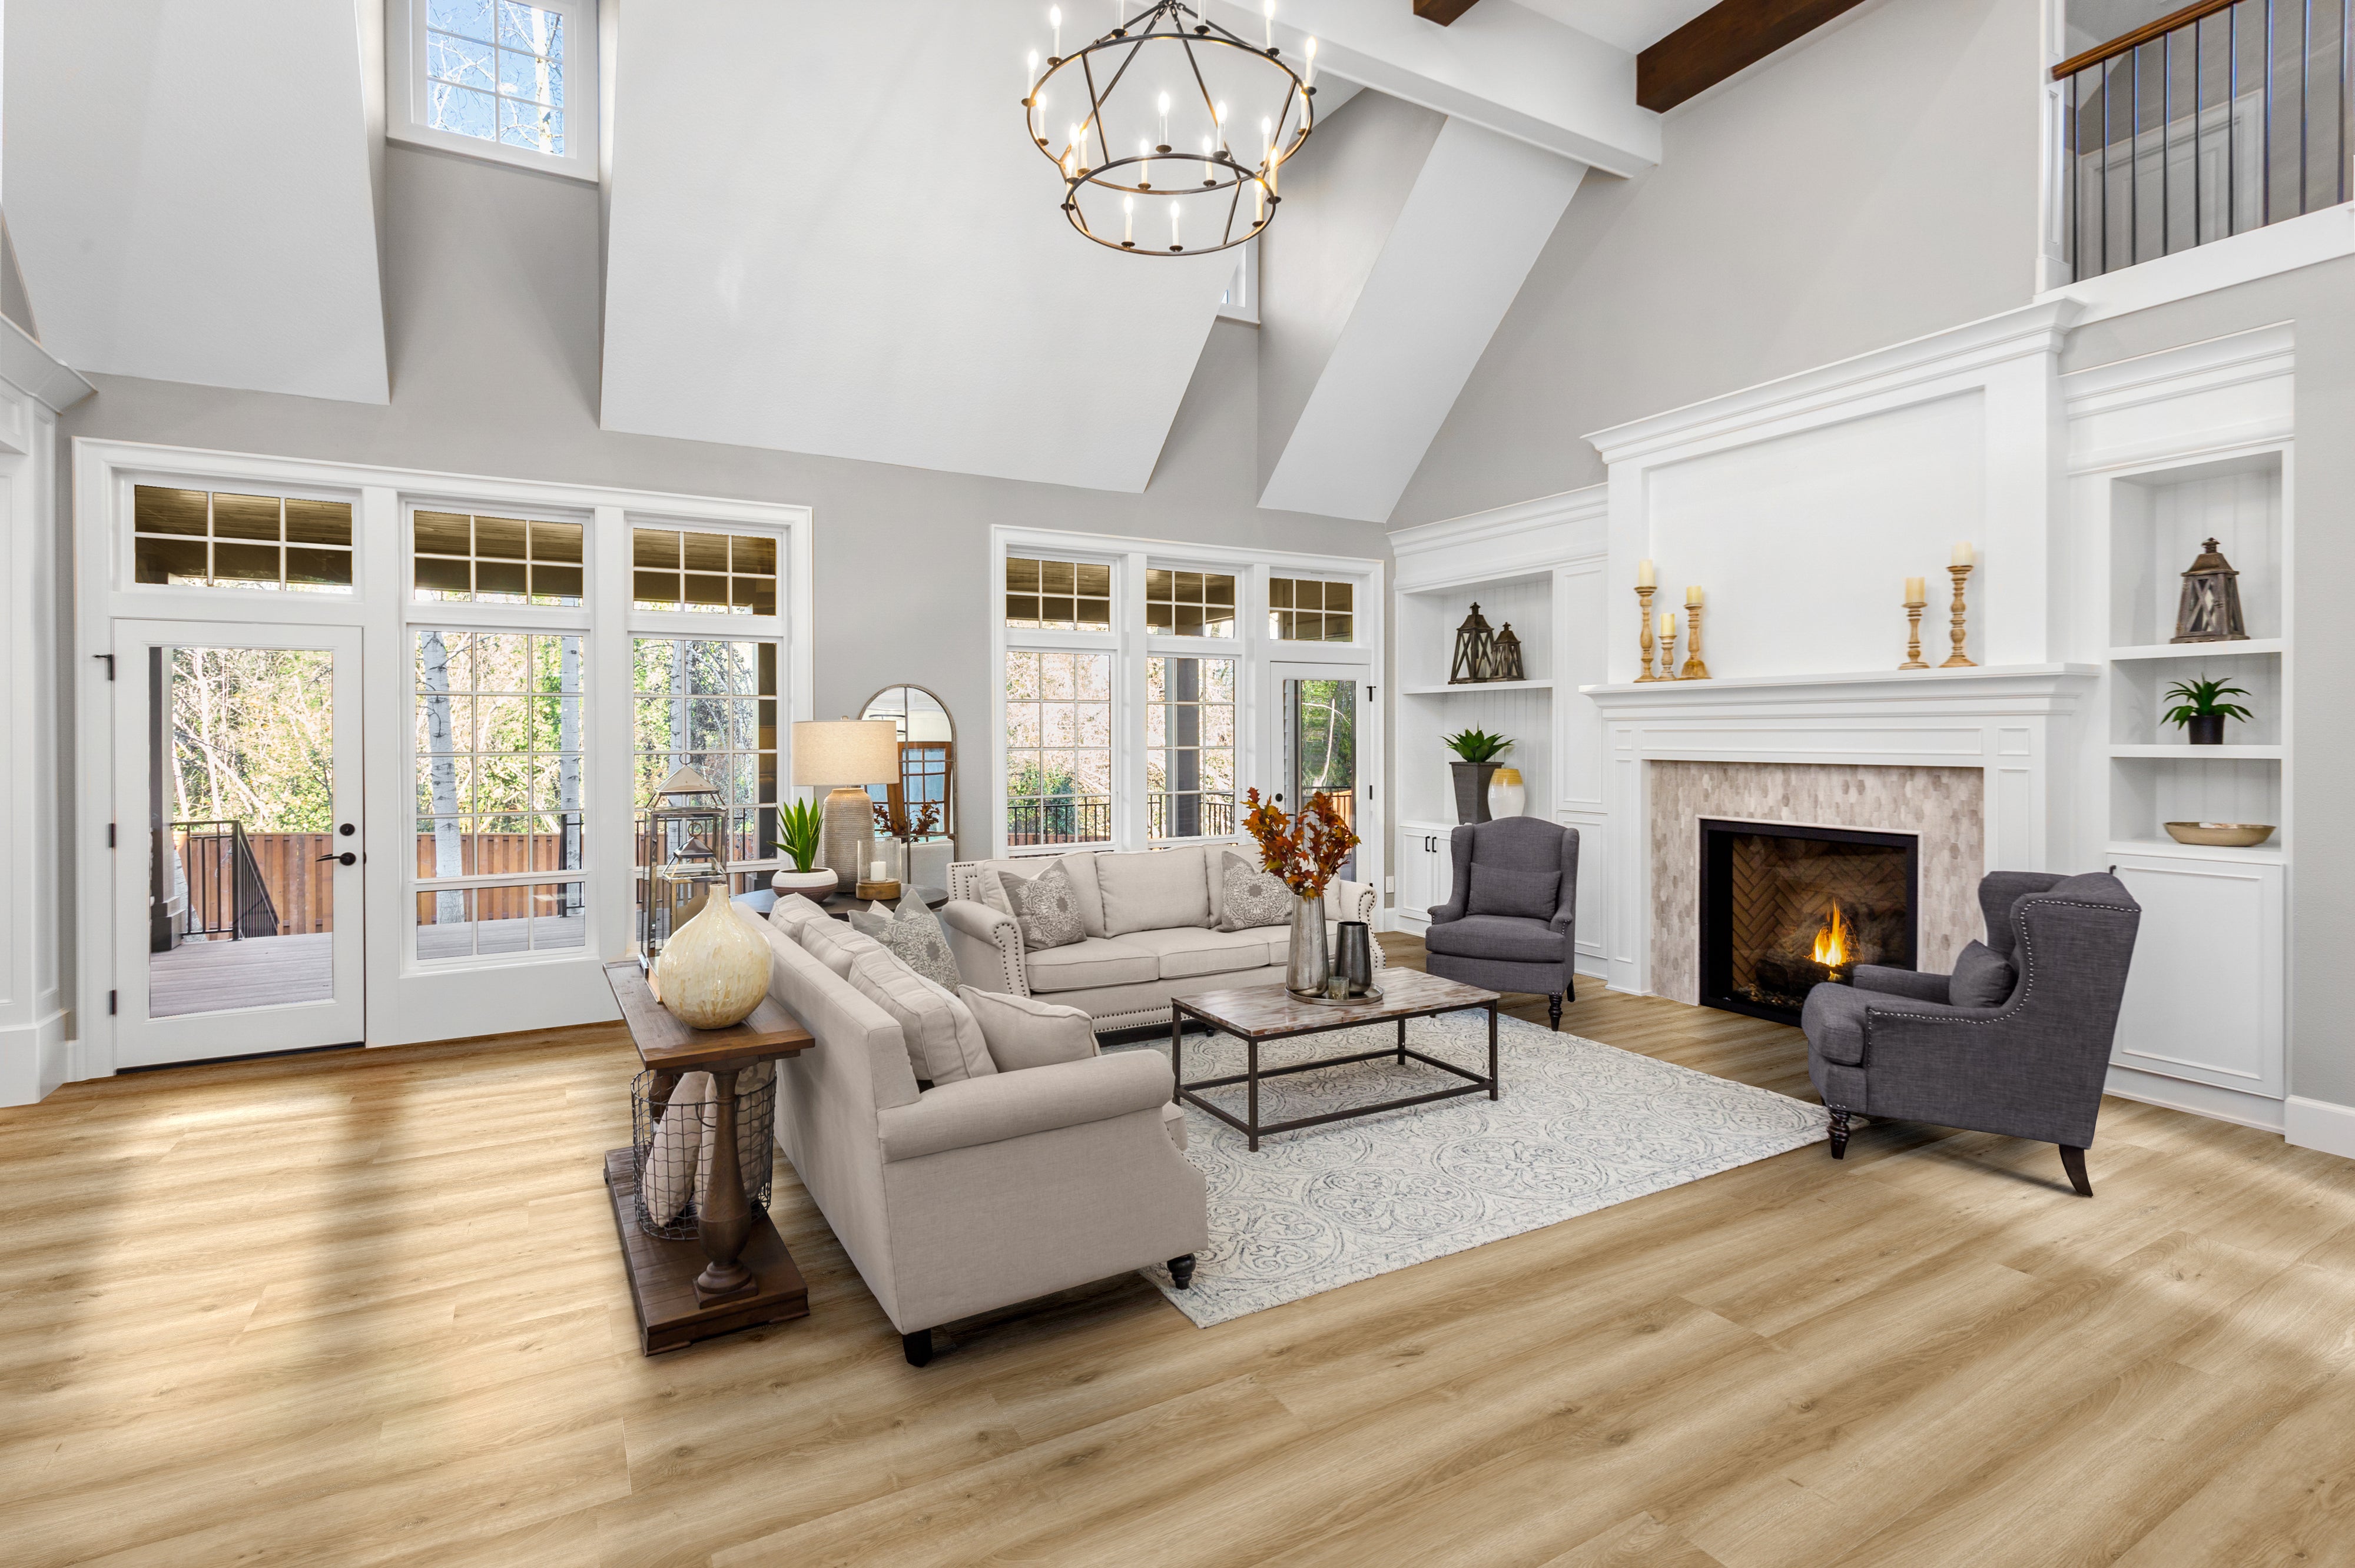 6 Vinyl Flooring Types Explained and Compared - Wood and Beyond Blog